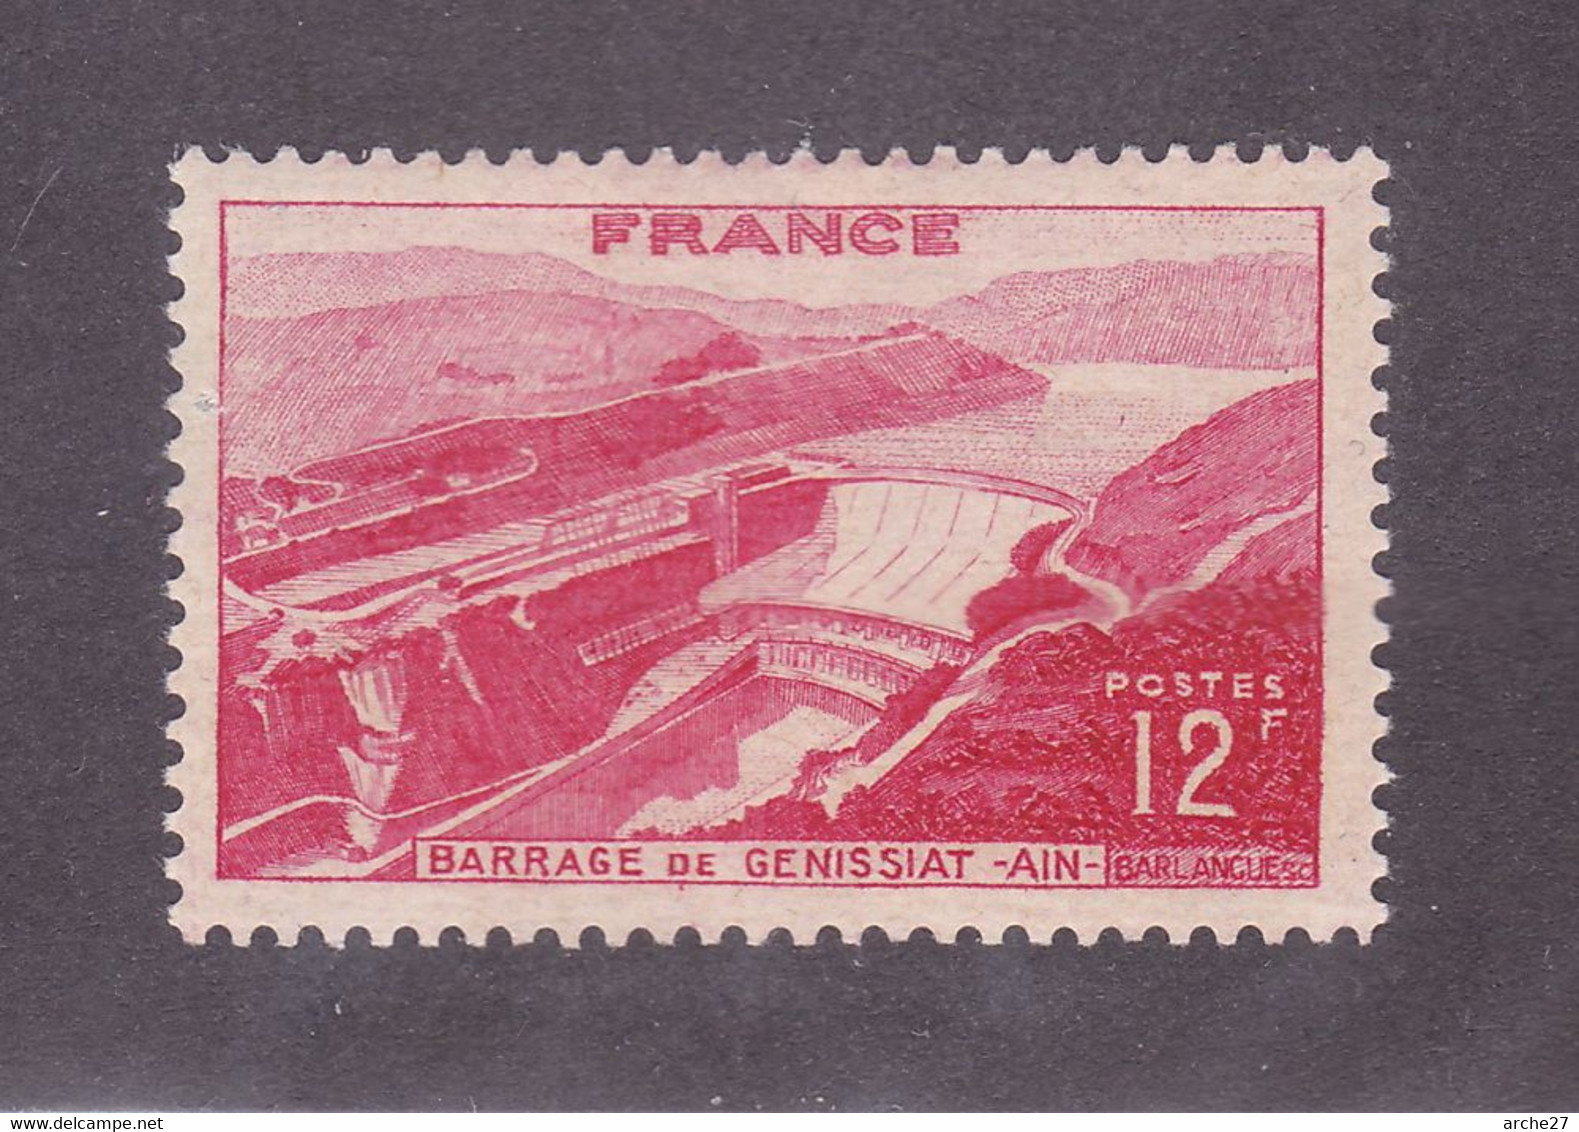 TIMBRE FRANCE N° 817 NEUF ** - Unused Stamps